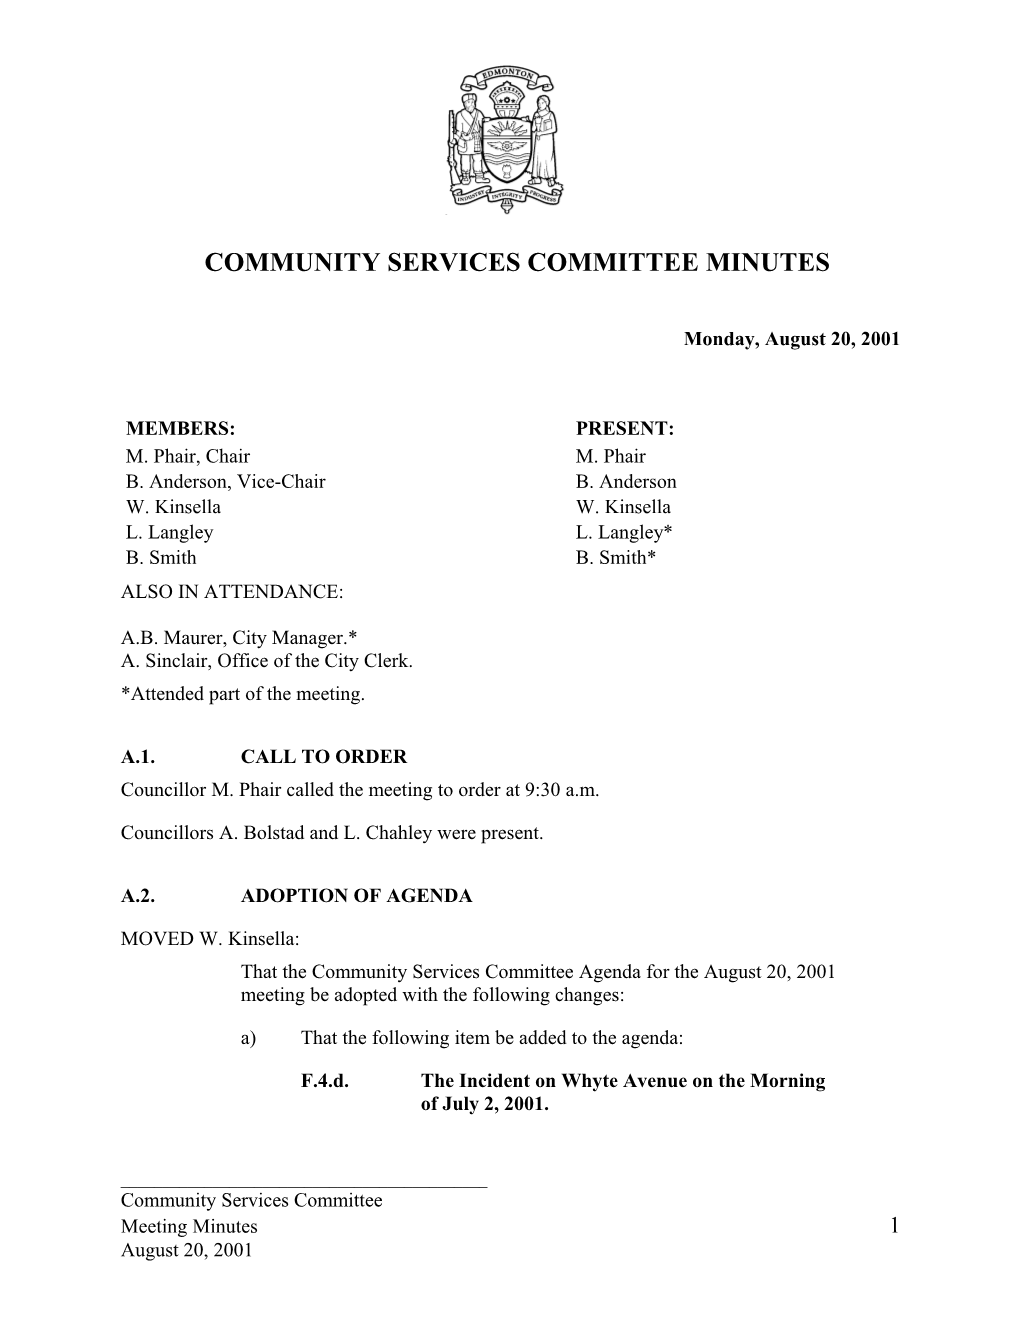 Minutes for Community Services Committee August 20, 2001 Meeting